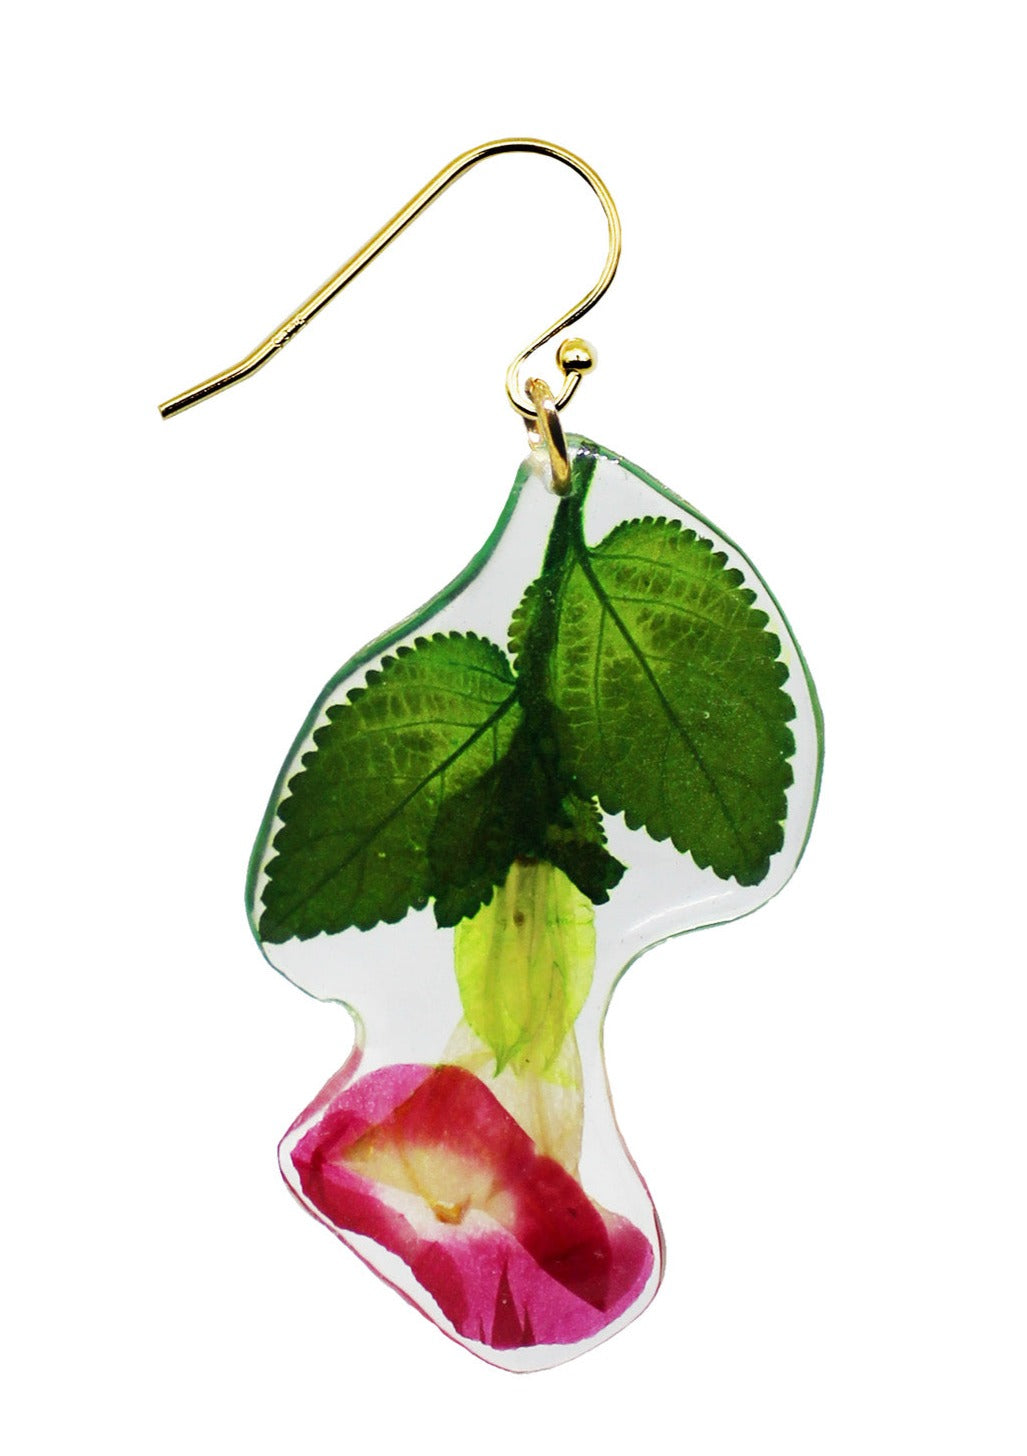 Resin Coated Blush Wishbone Flower with Green Leaves on a French Hook Earring